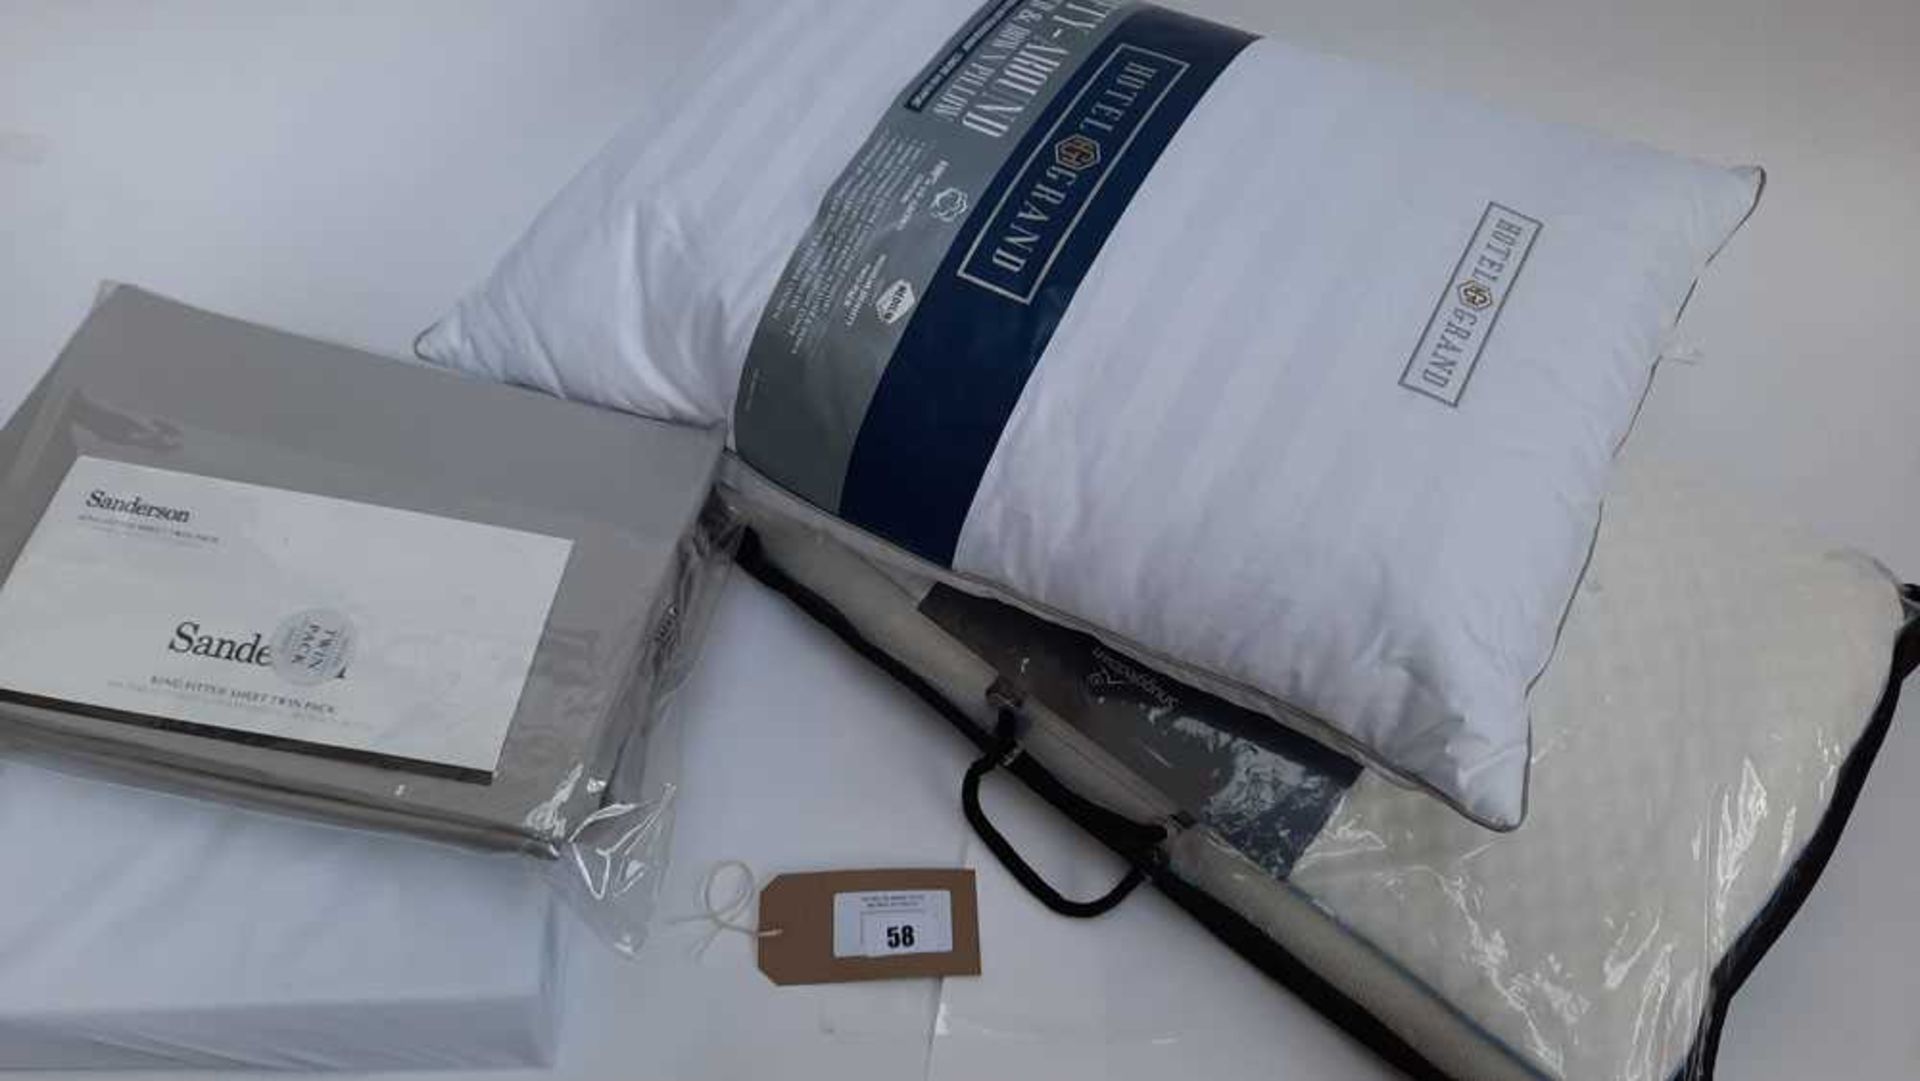 +VAT Climate controlled memory foam pillow, Hotel Grand pillow and loose bedding